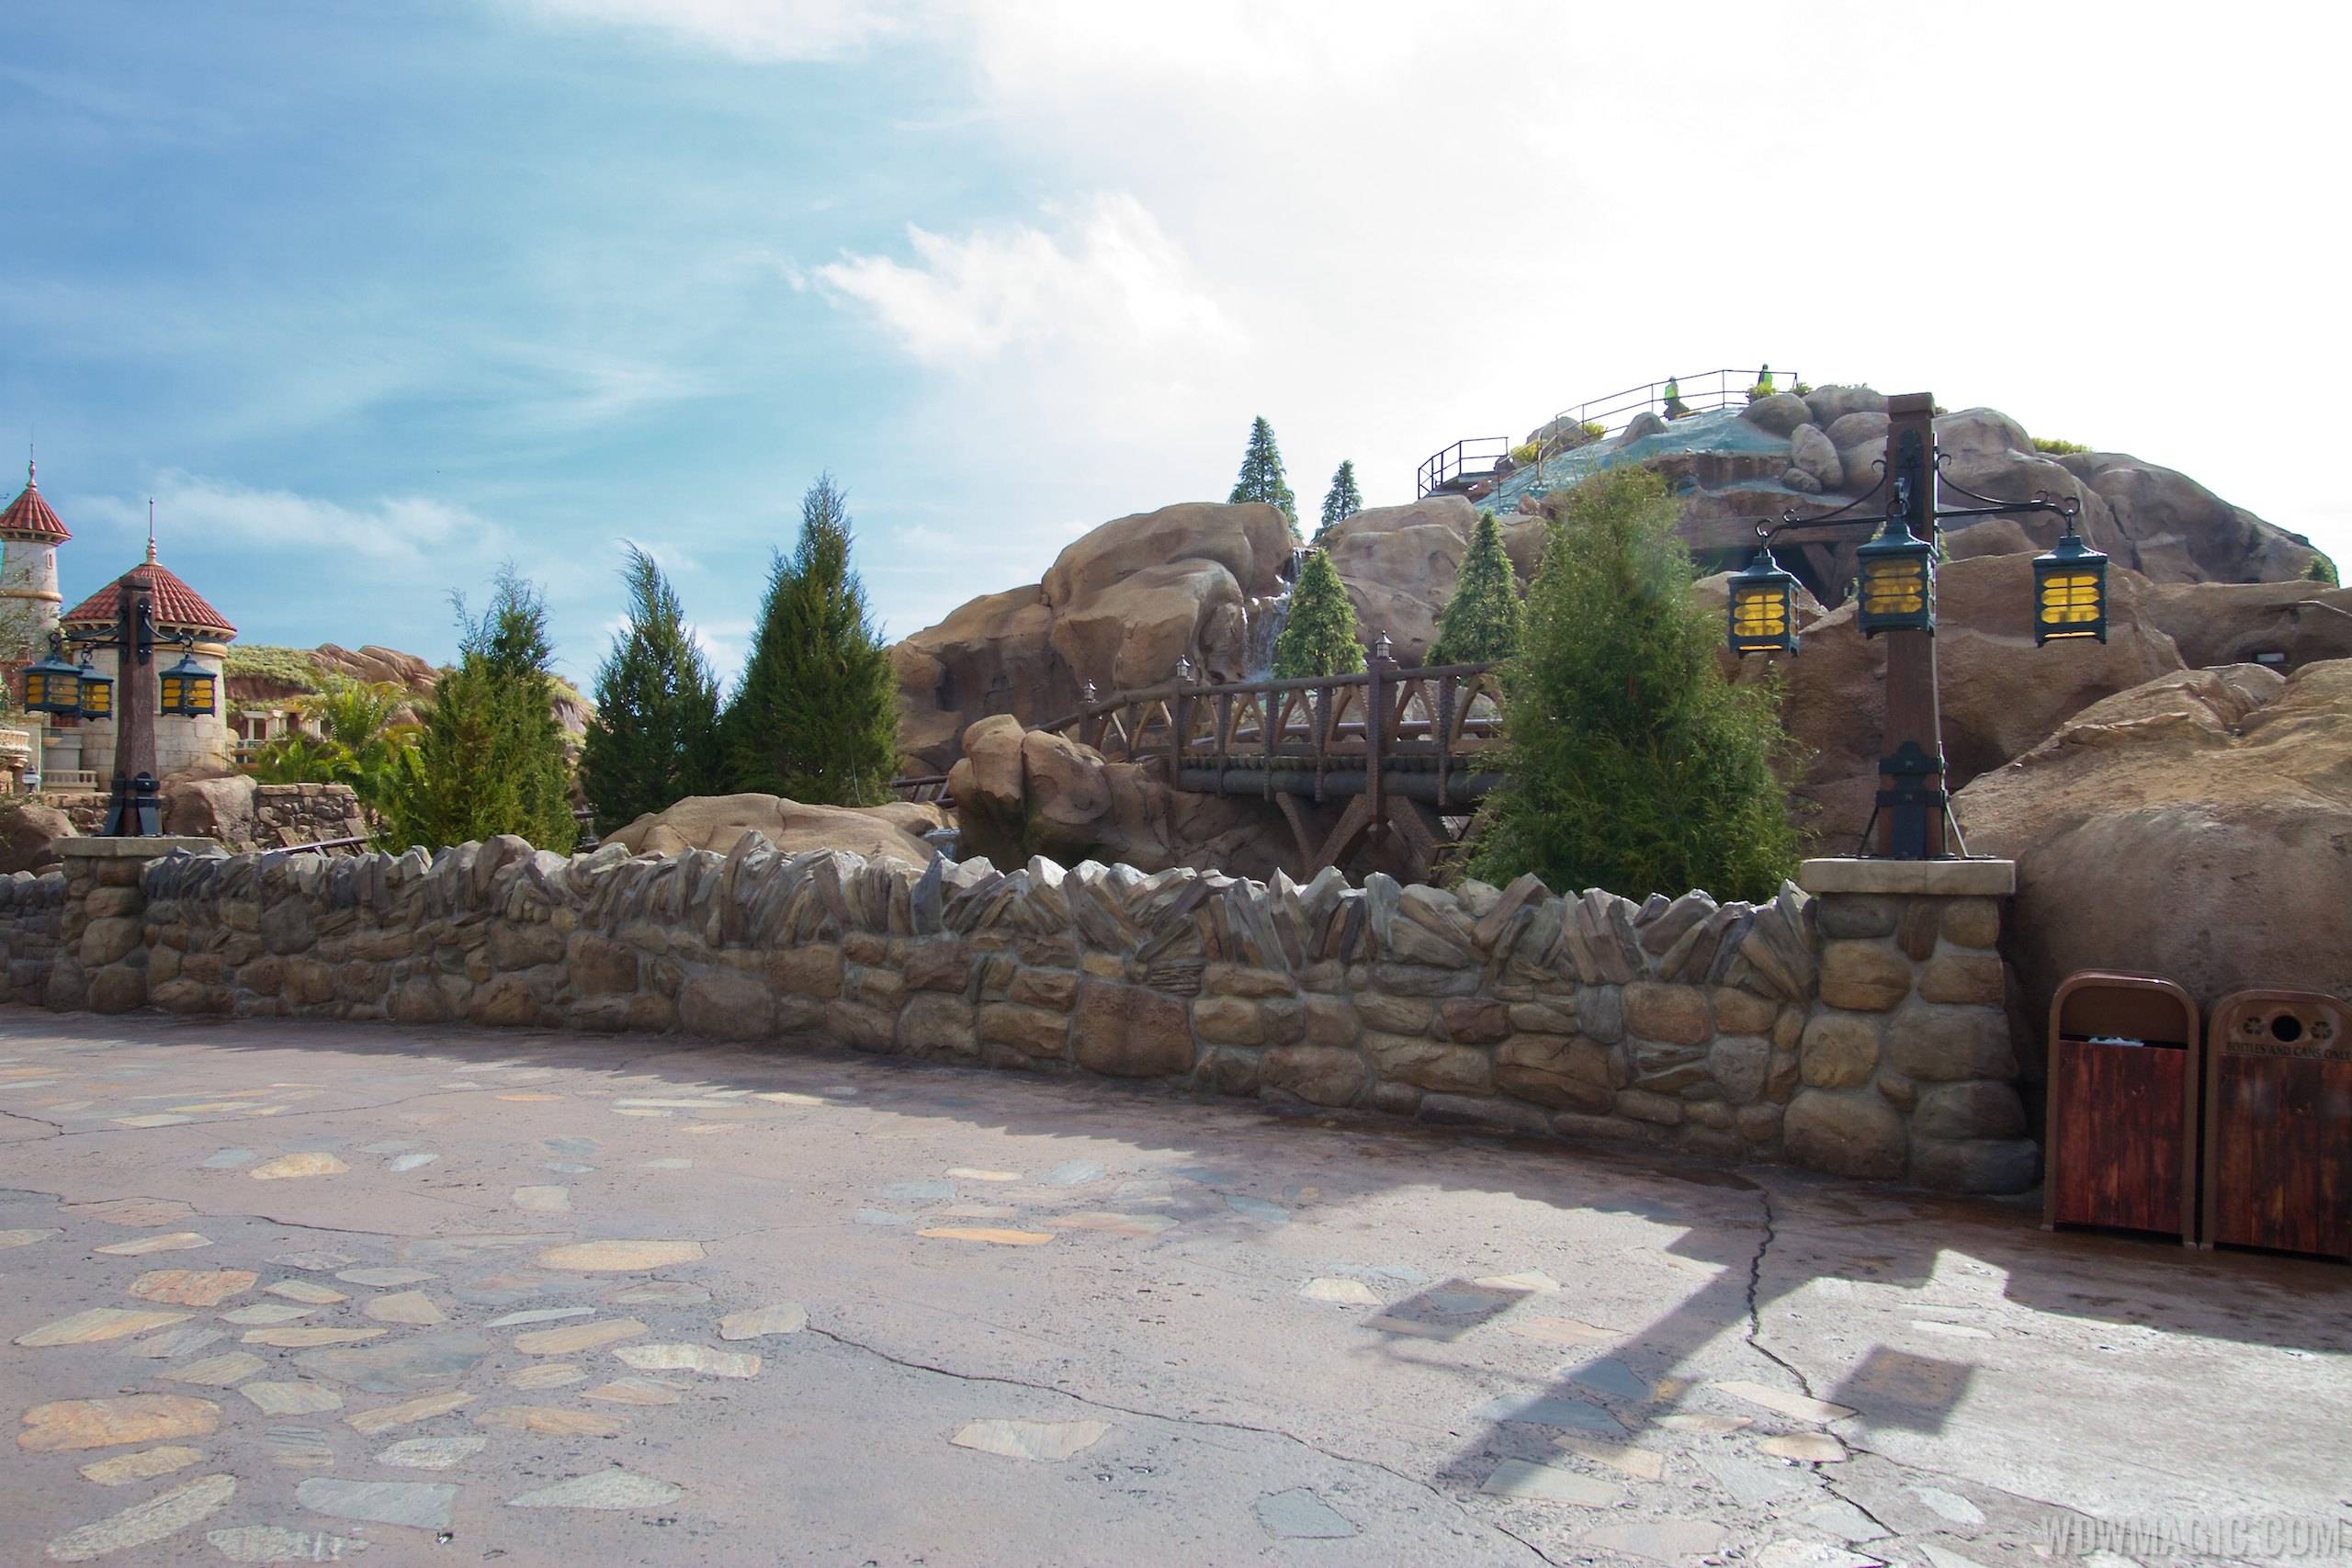 PHOTOS - More walls come down at the Seven Dwarfs Mine Train to reveal waterfalls and the main drop